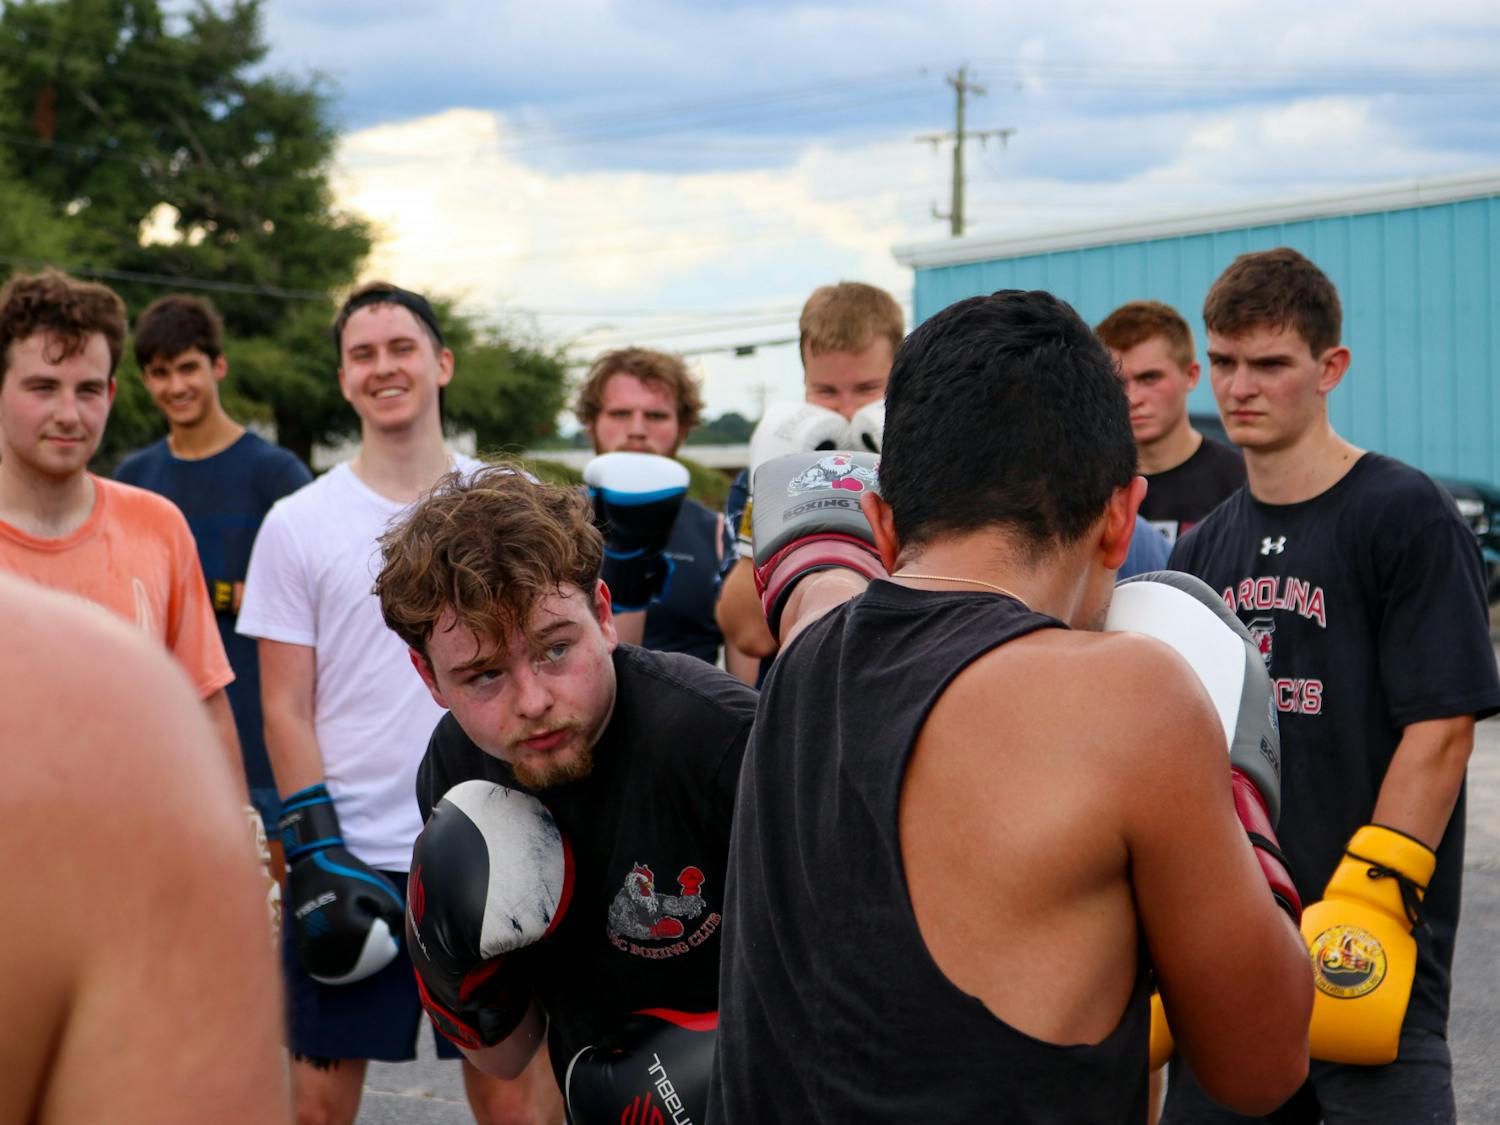 Club President Ben McMullen leads lesson on combo creation and how to quickly strike your opponent after dodging a parry. The Carolina Boxing Club gathered Sept. 12, 2022, at Battle Boxing Gym to begin training for upcoming matches.&nbsp;